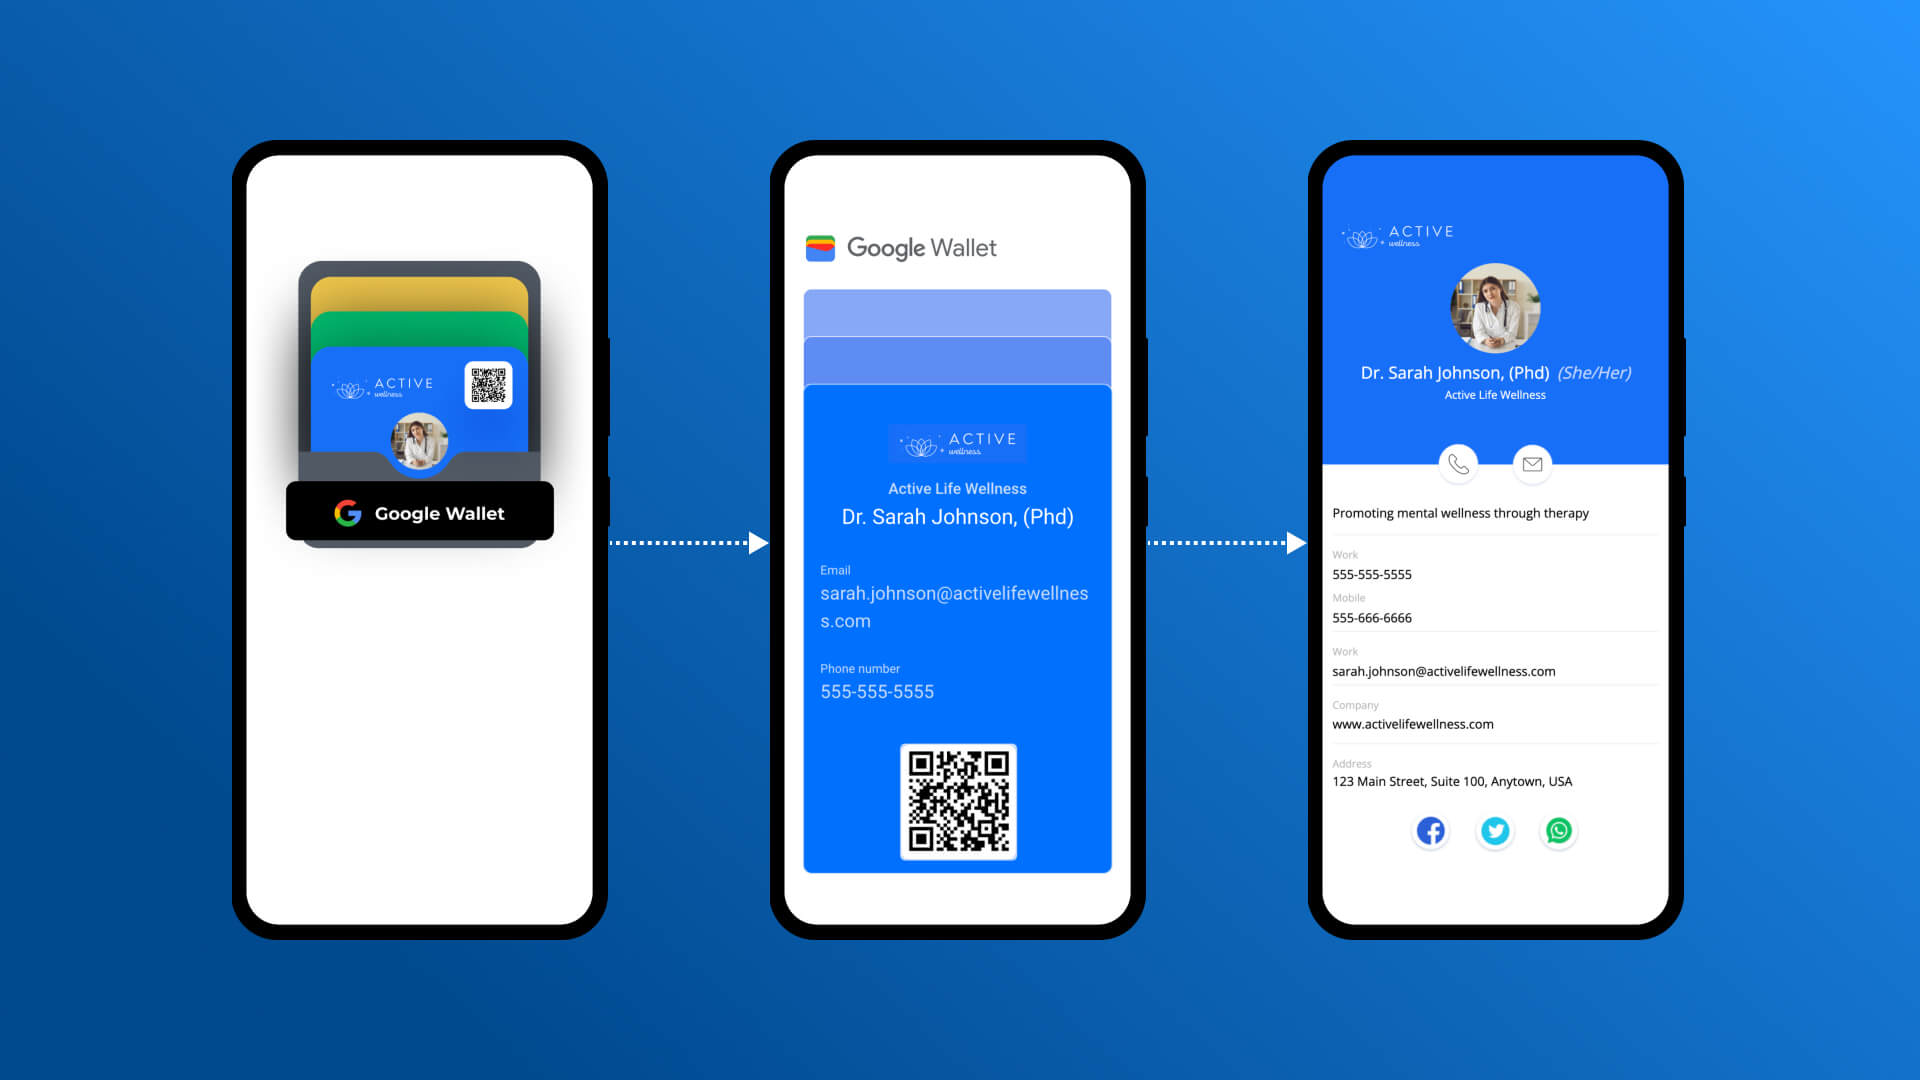 How To Add a Digital Business Card to Your Google Wallet in 2 Minutes [No App Needed]